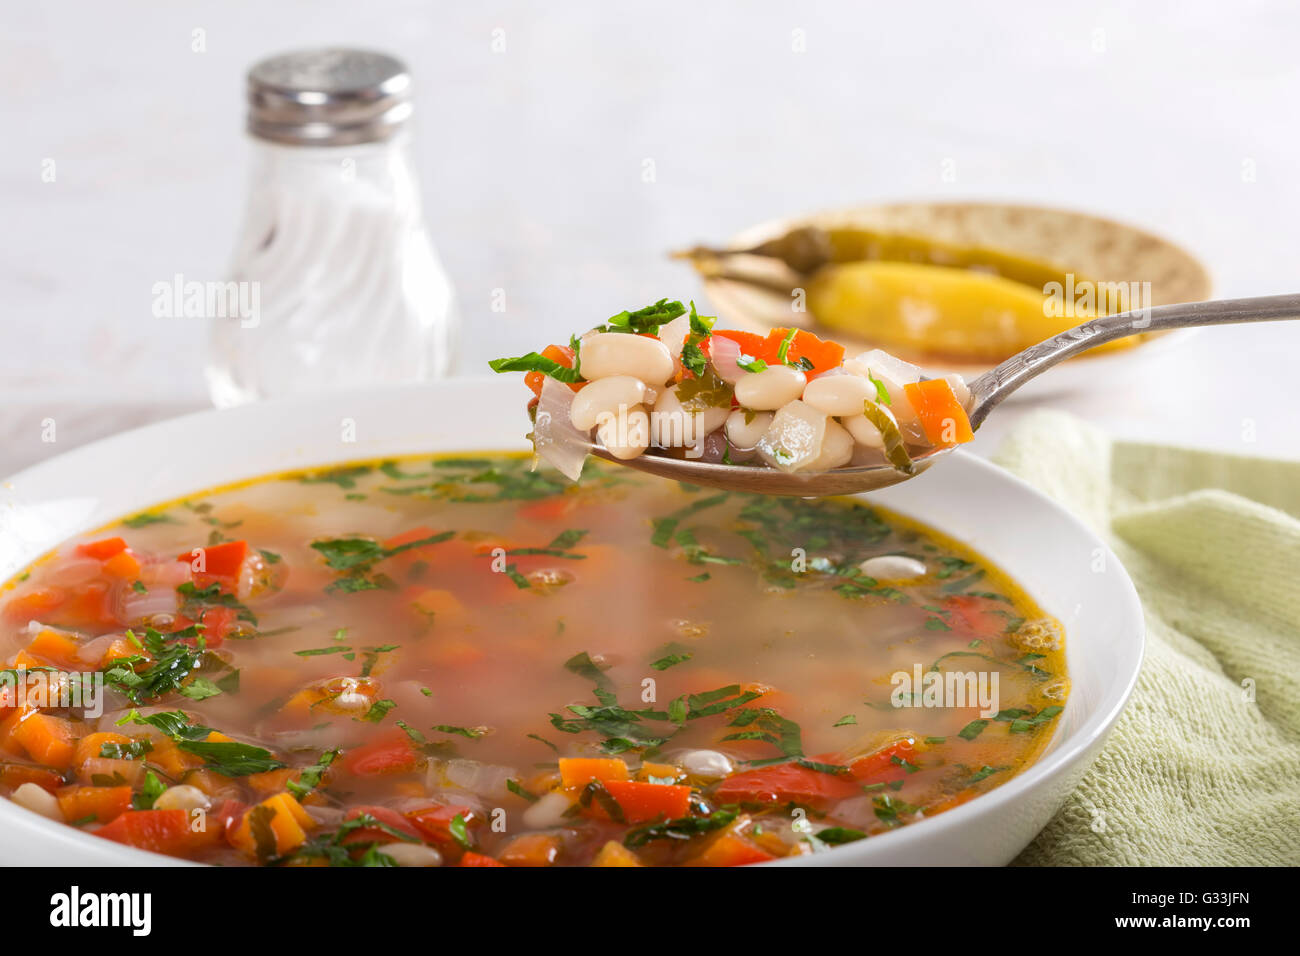 Bean soup with vegetables in a white bowl on table Stock Photo